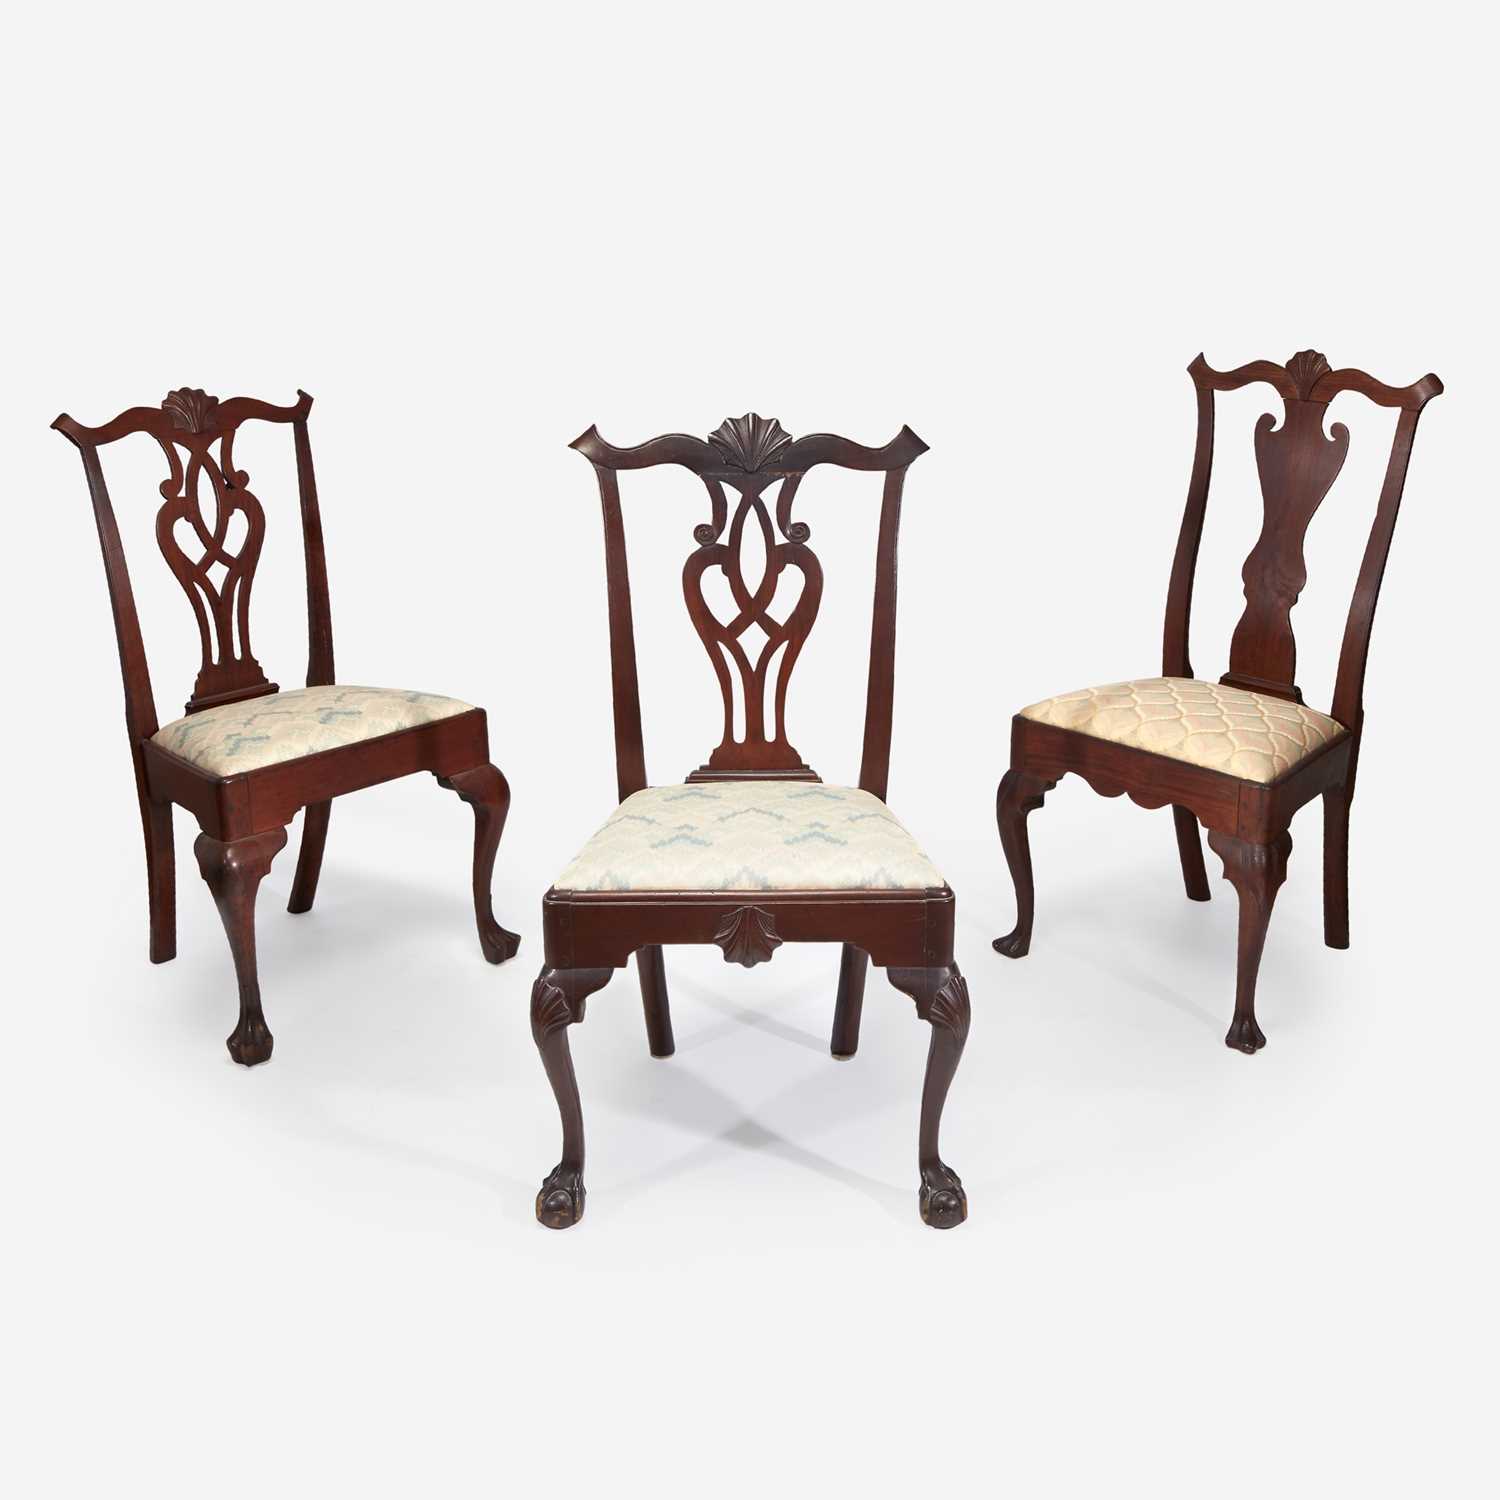 Lot 52 - Three Queen Anne / Chippendale carved walnut side chairs